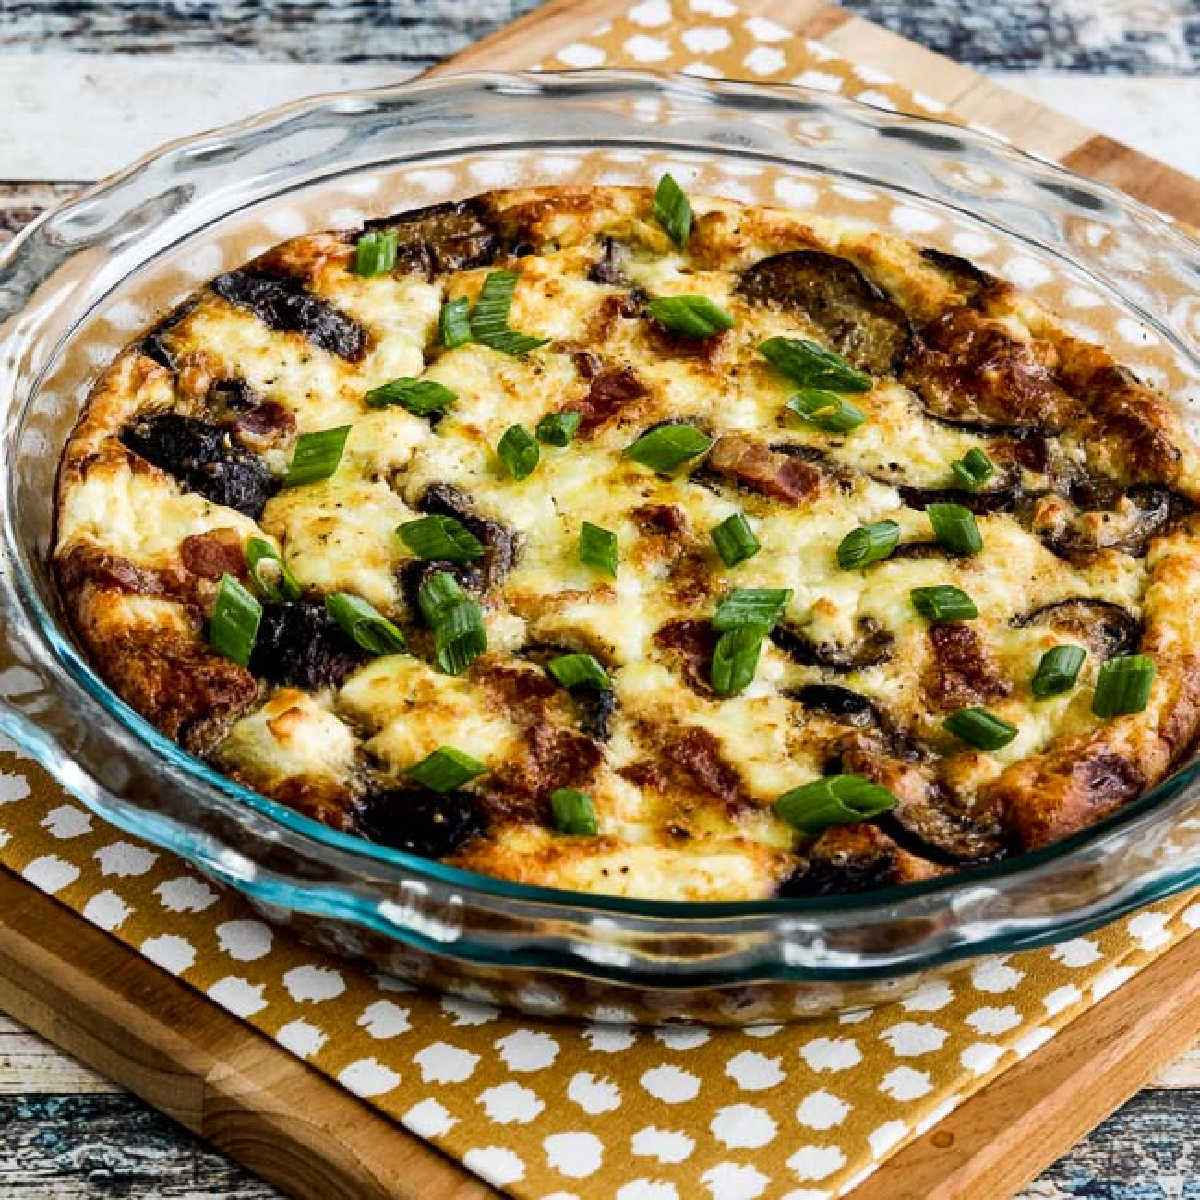 Square image of Bacon, Mushroom, and Feta Crustless Quiche shown in baking dish on napkin and cutting board